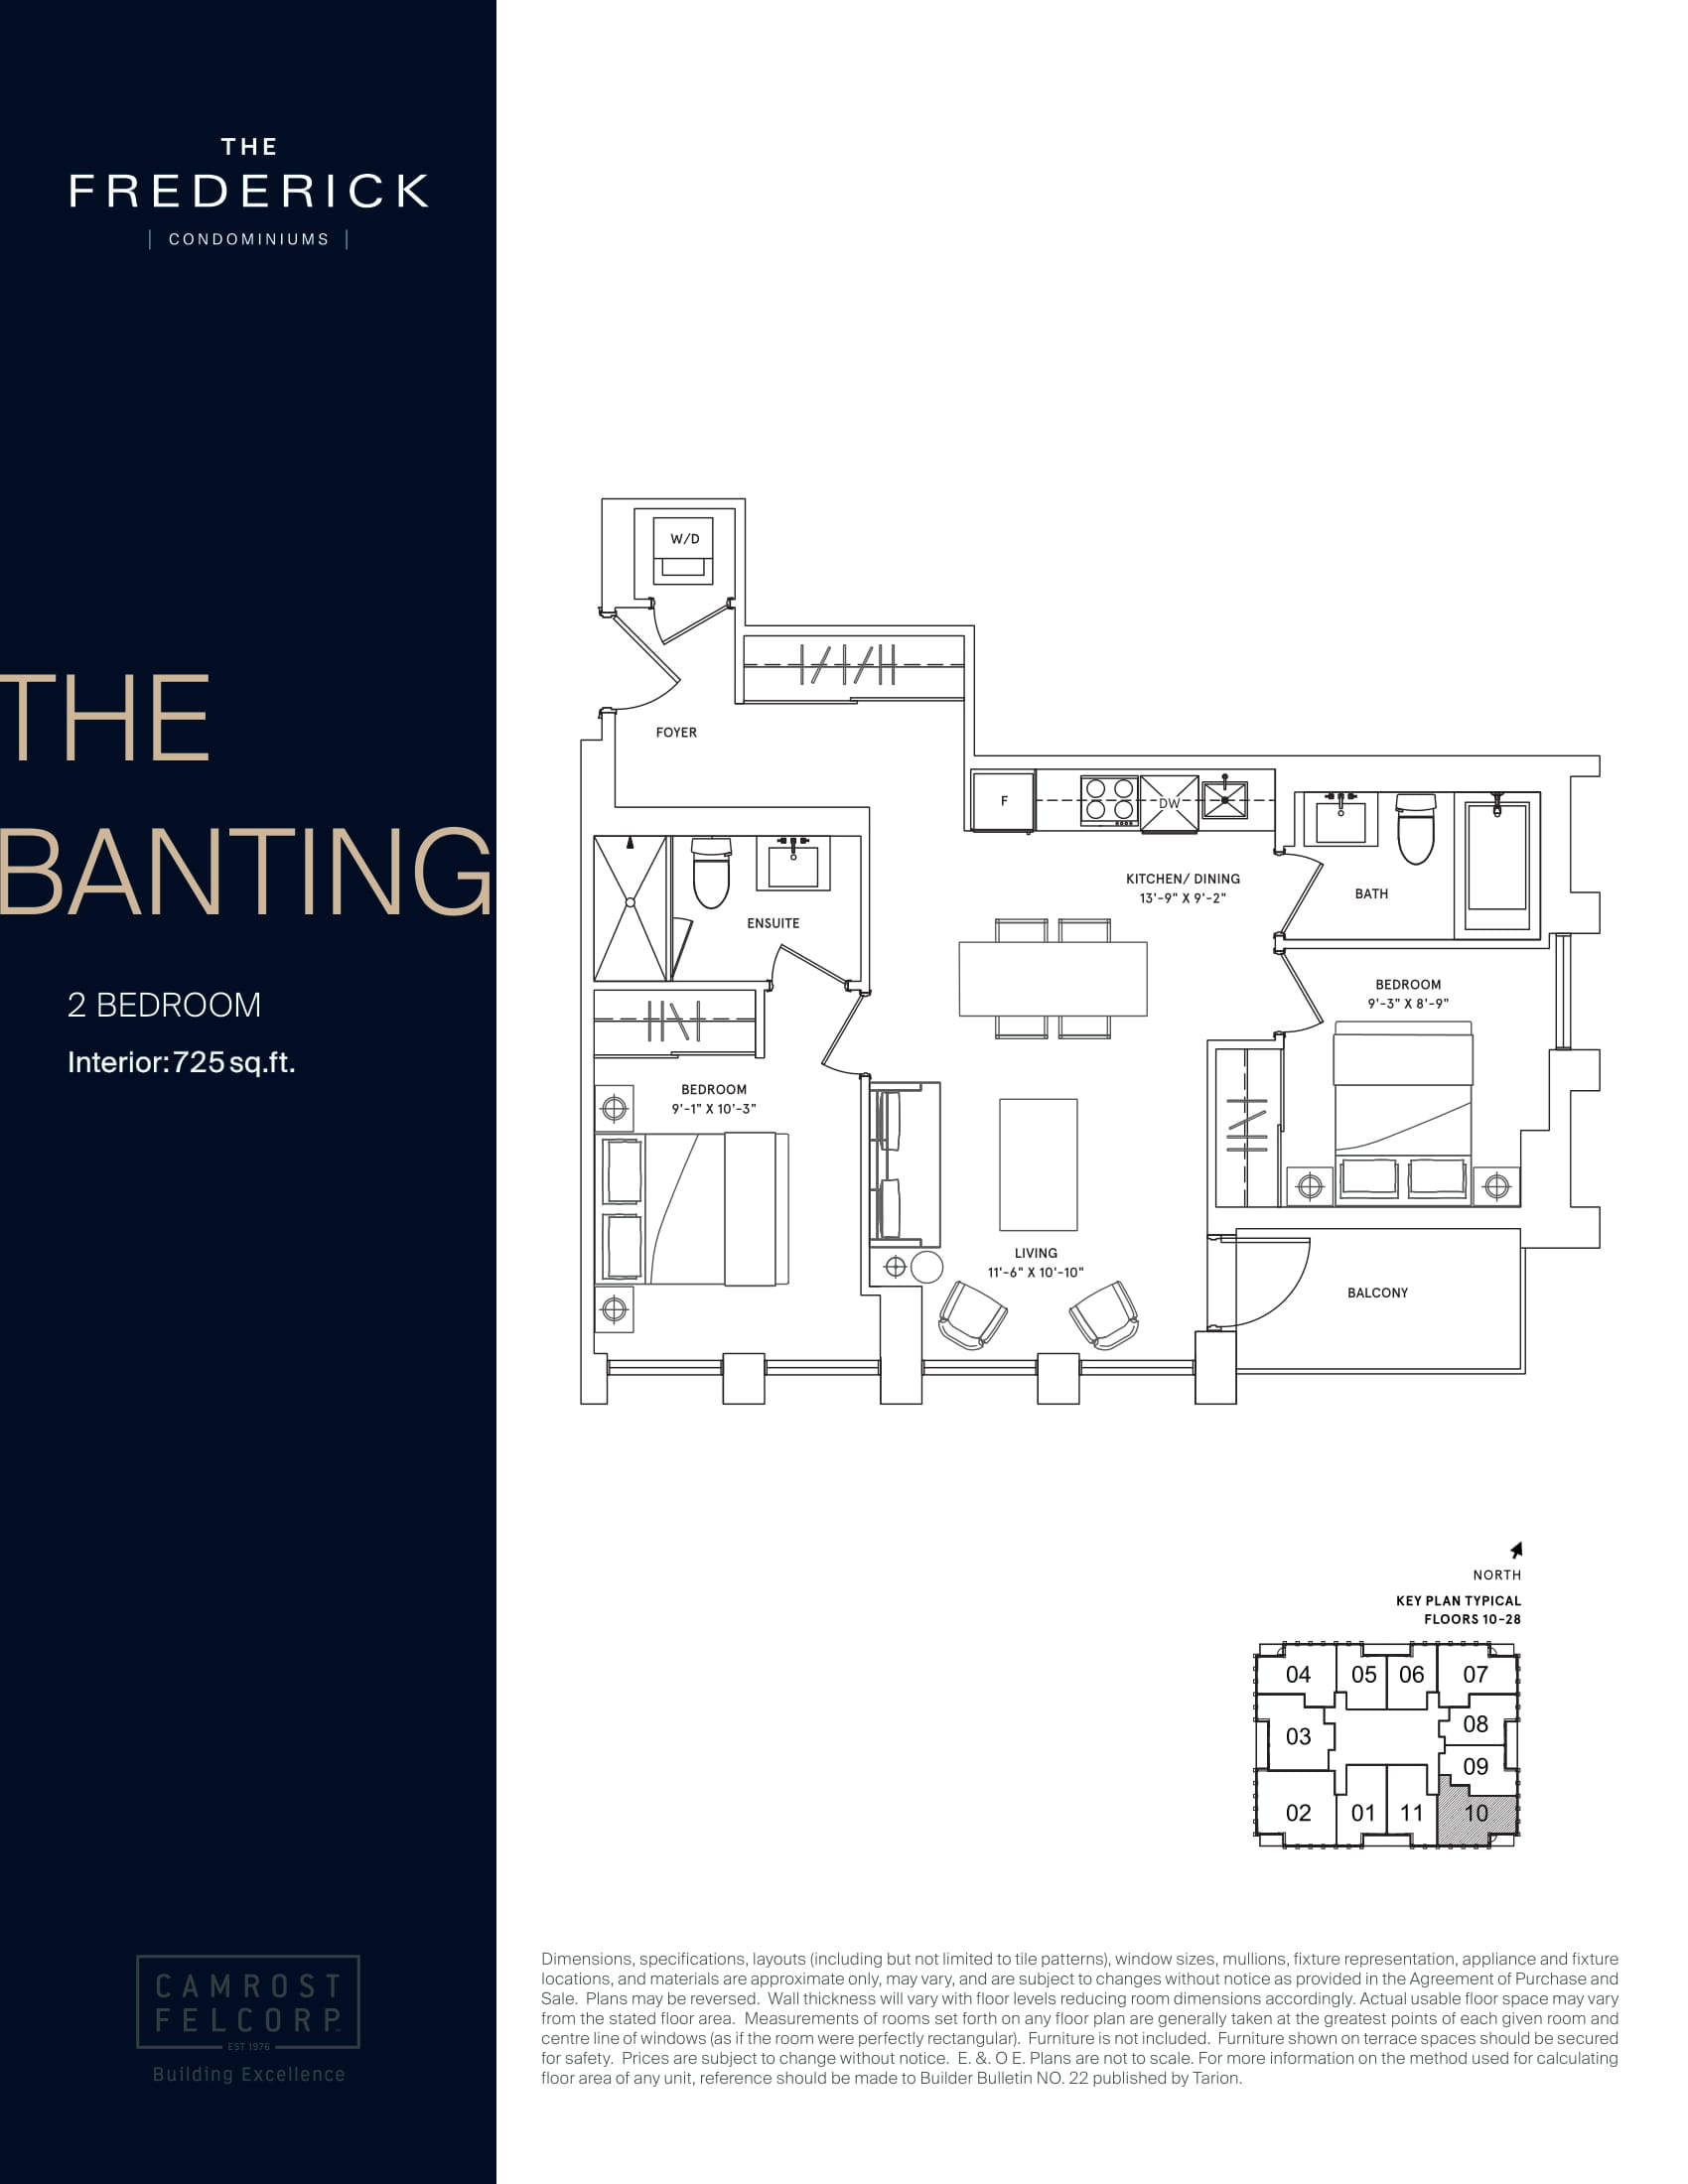 The Banting